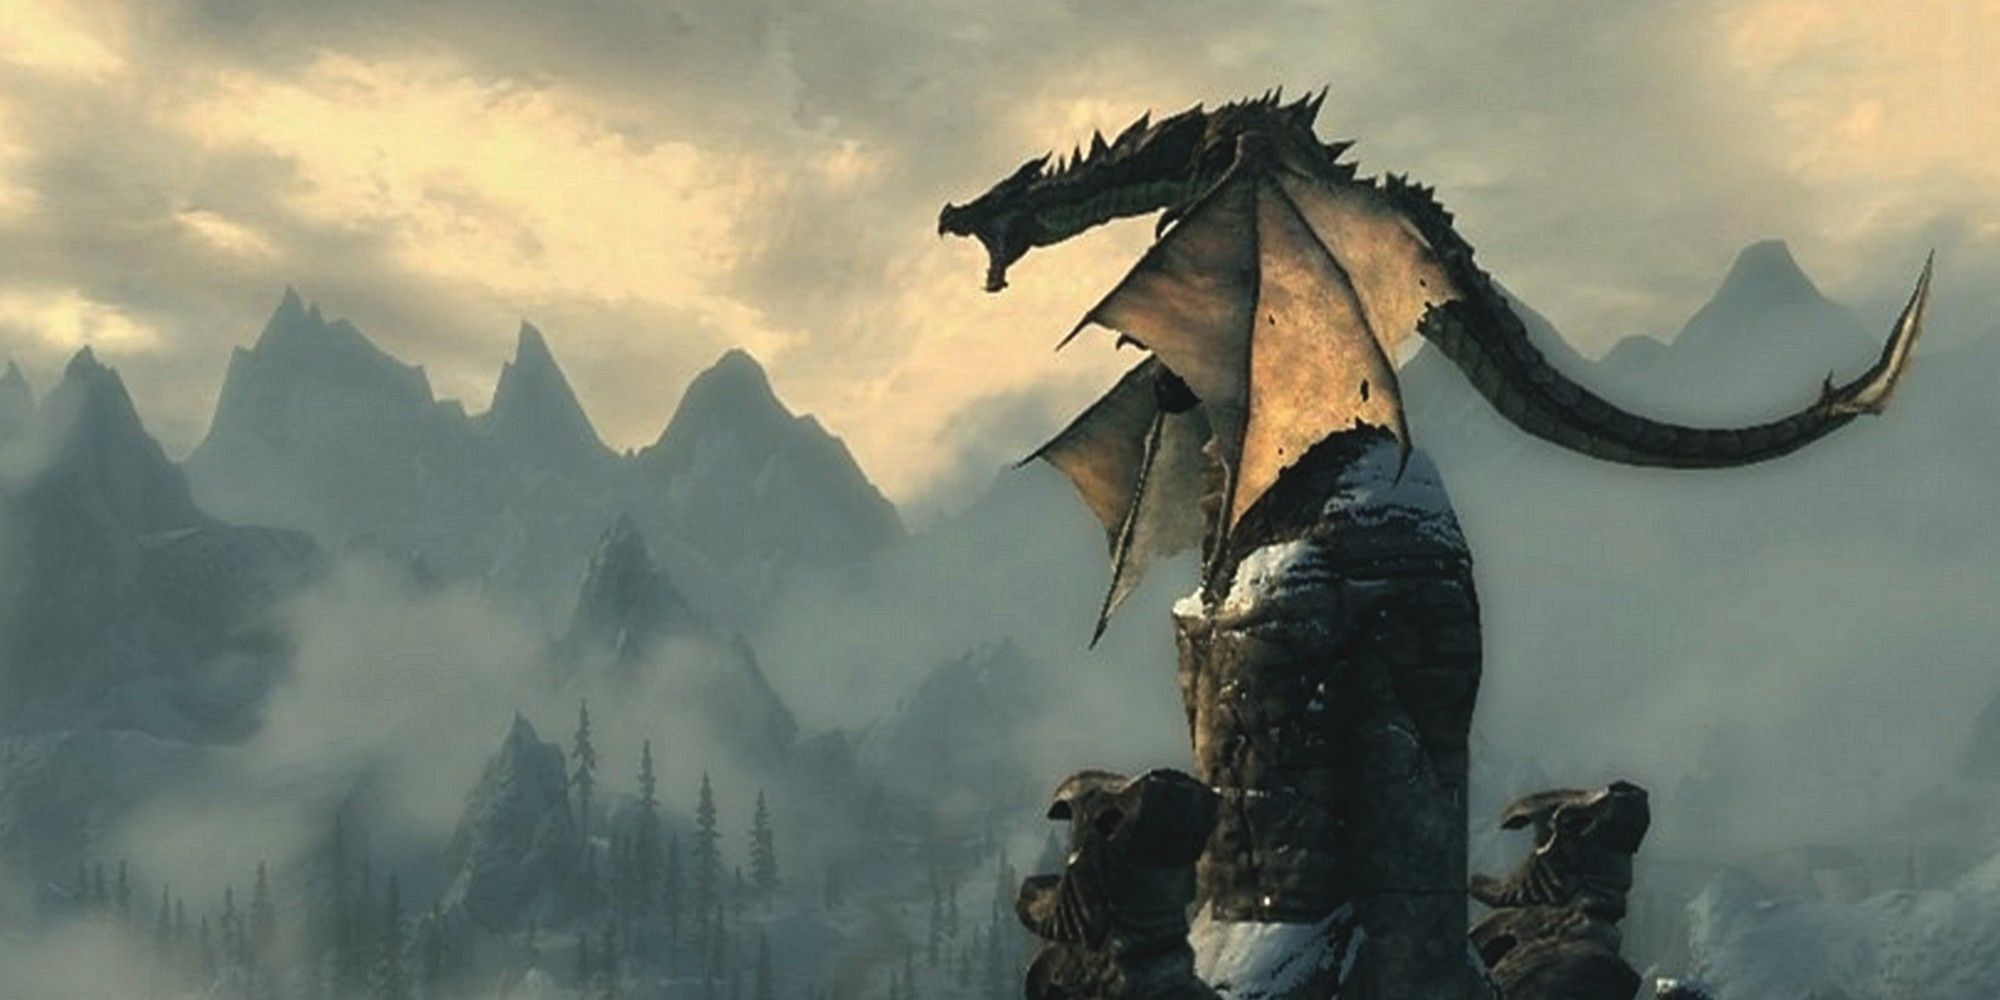 skyrim dragon roaring on top of a building with mountains in the background